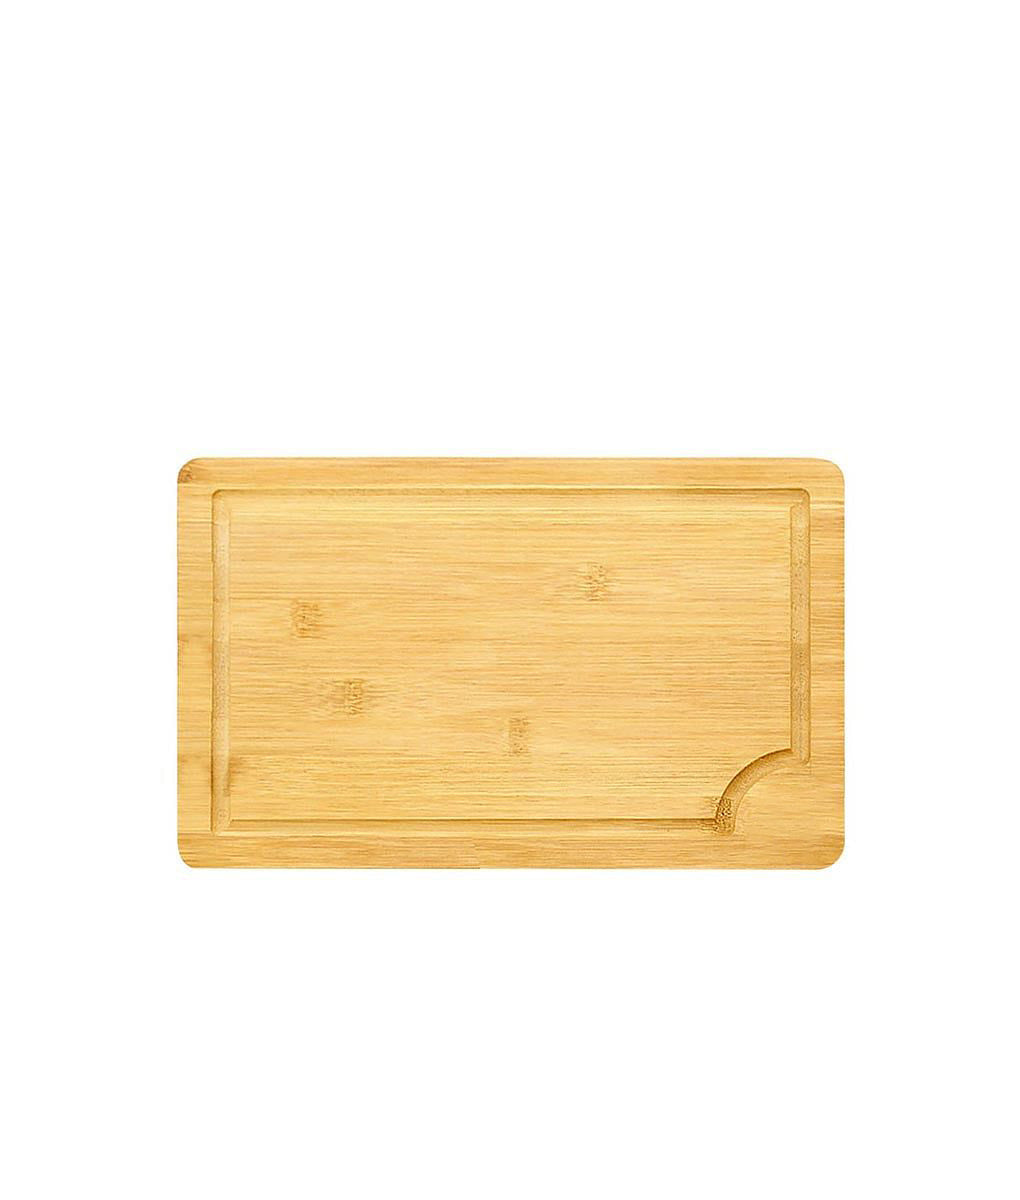 Organic Bamboo Architecture Household Kitchen Accesionse Cutting Board